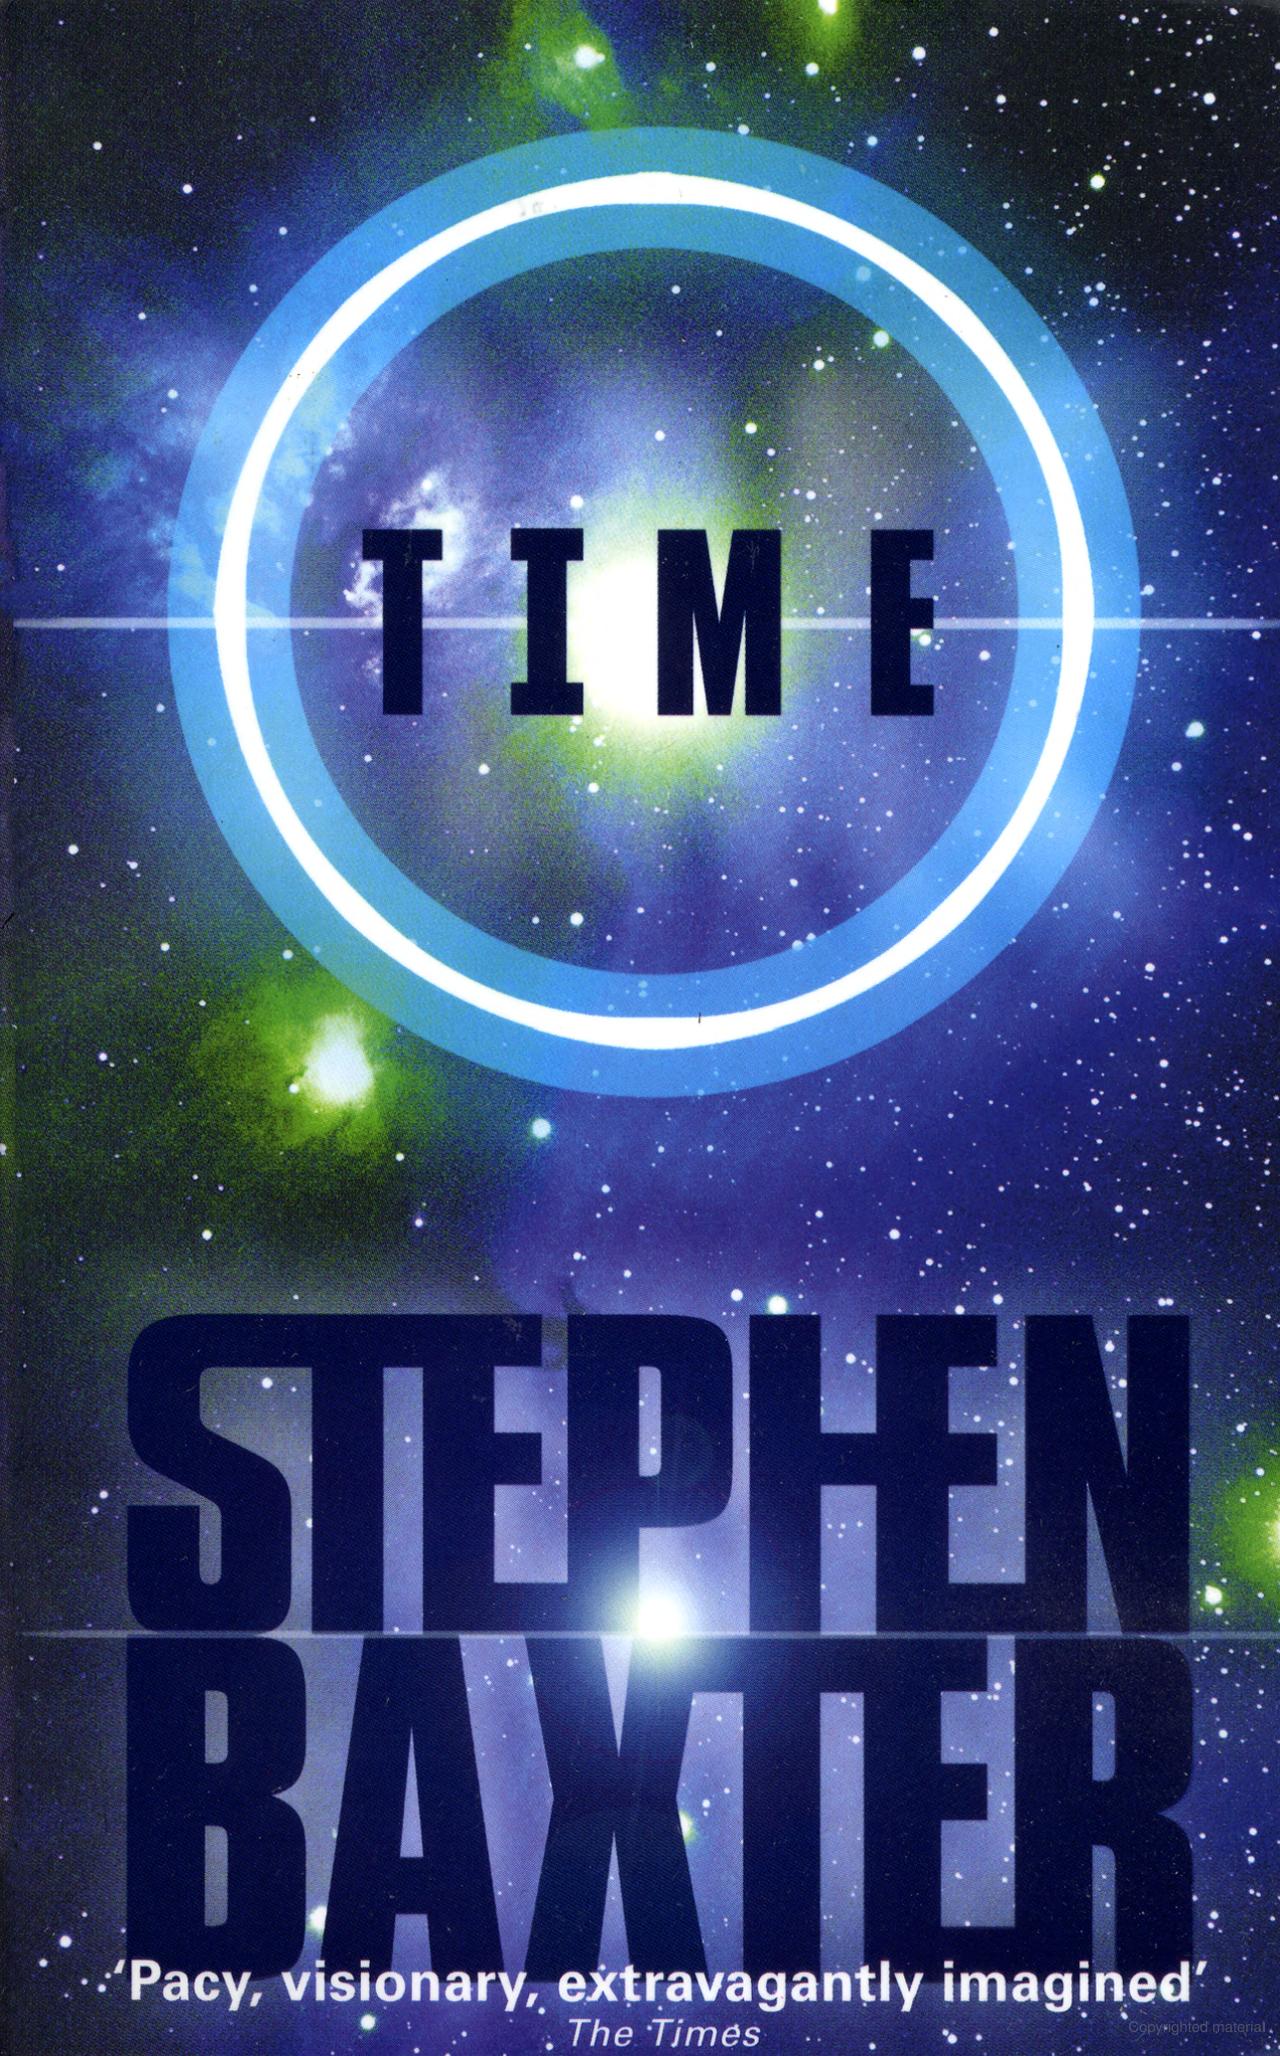 Book cover of Time by Stephen Baxter.